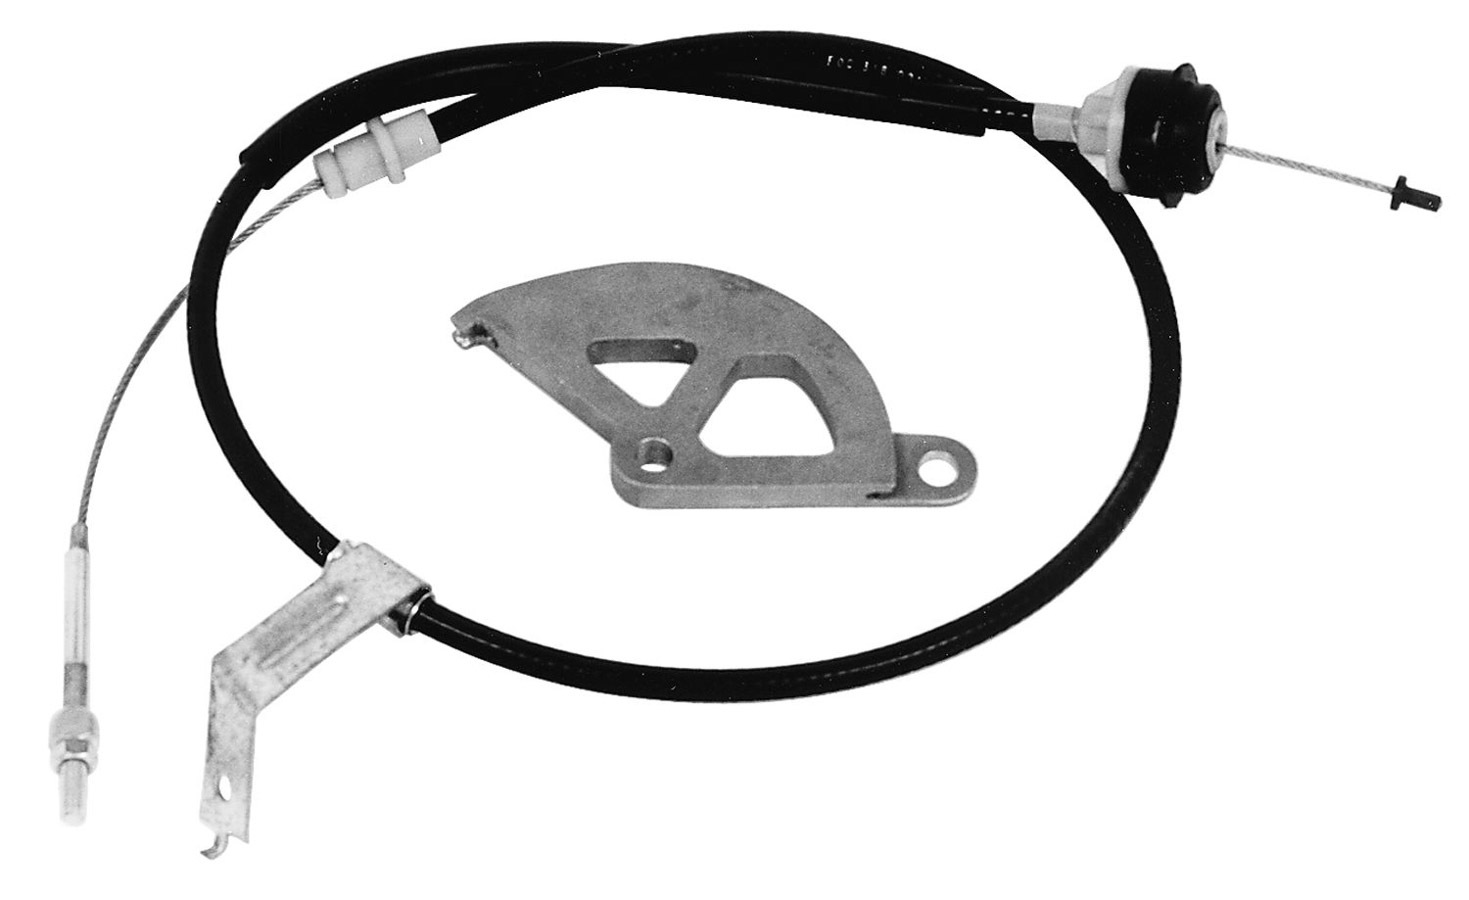 FORD Clutch Quadrant Kit, Adjustable, Double Hook, Cable/Quadrant Included, Ford Mustang 1982-95, Kit